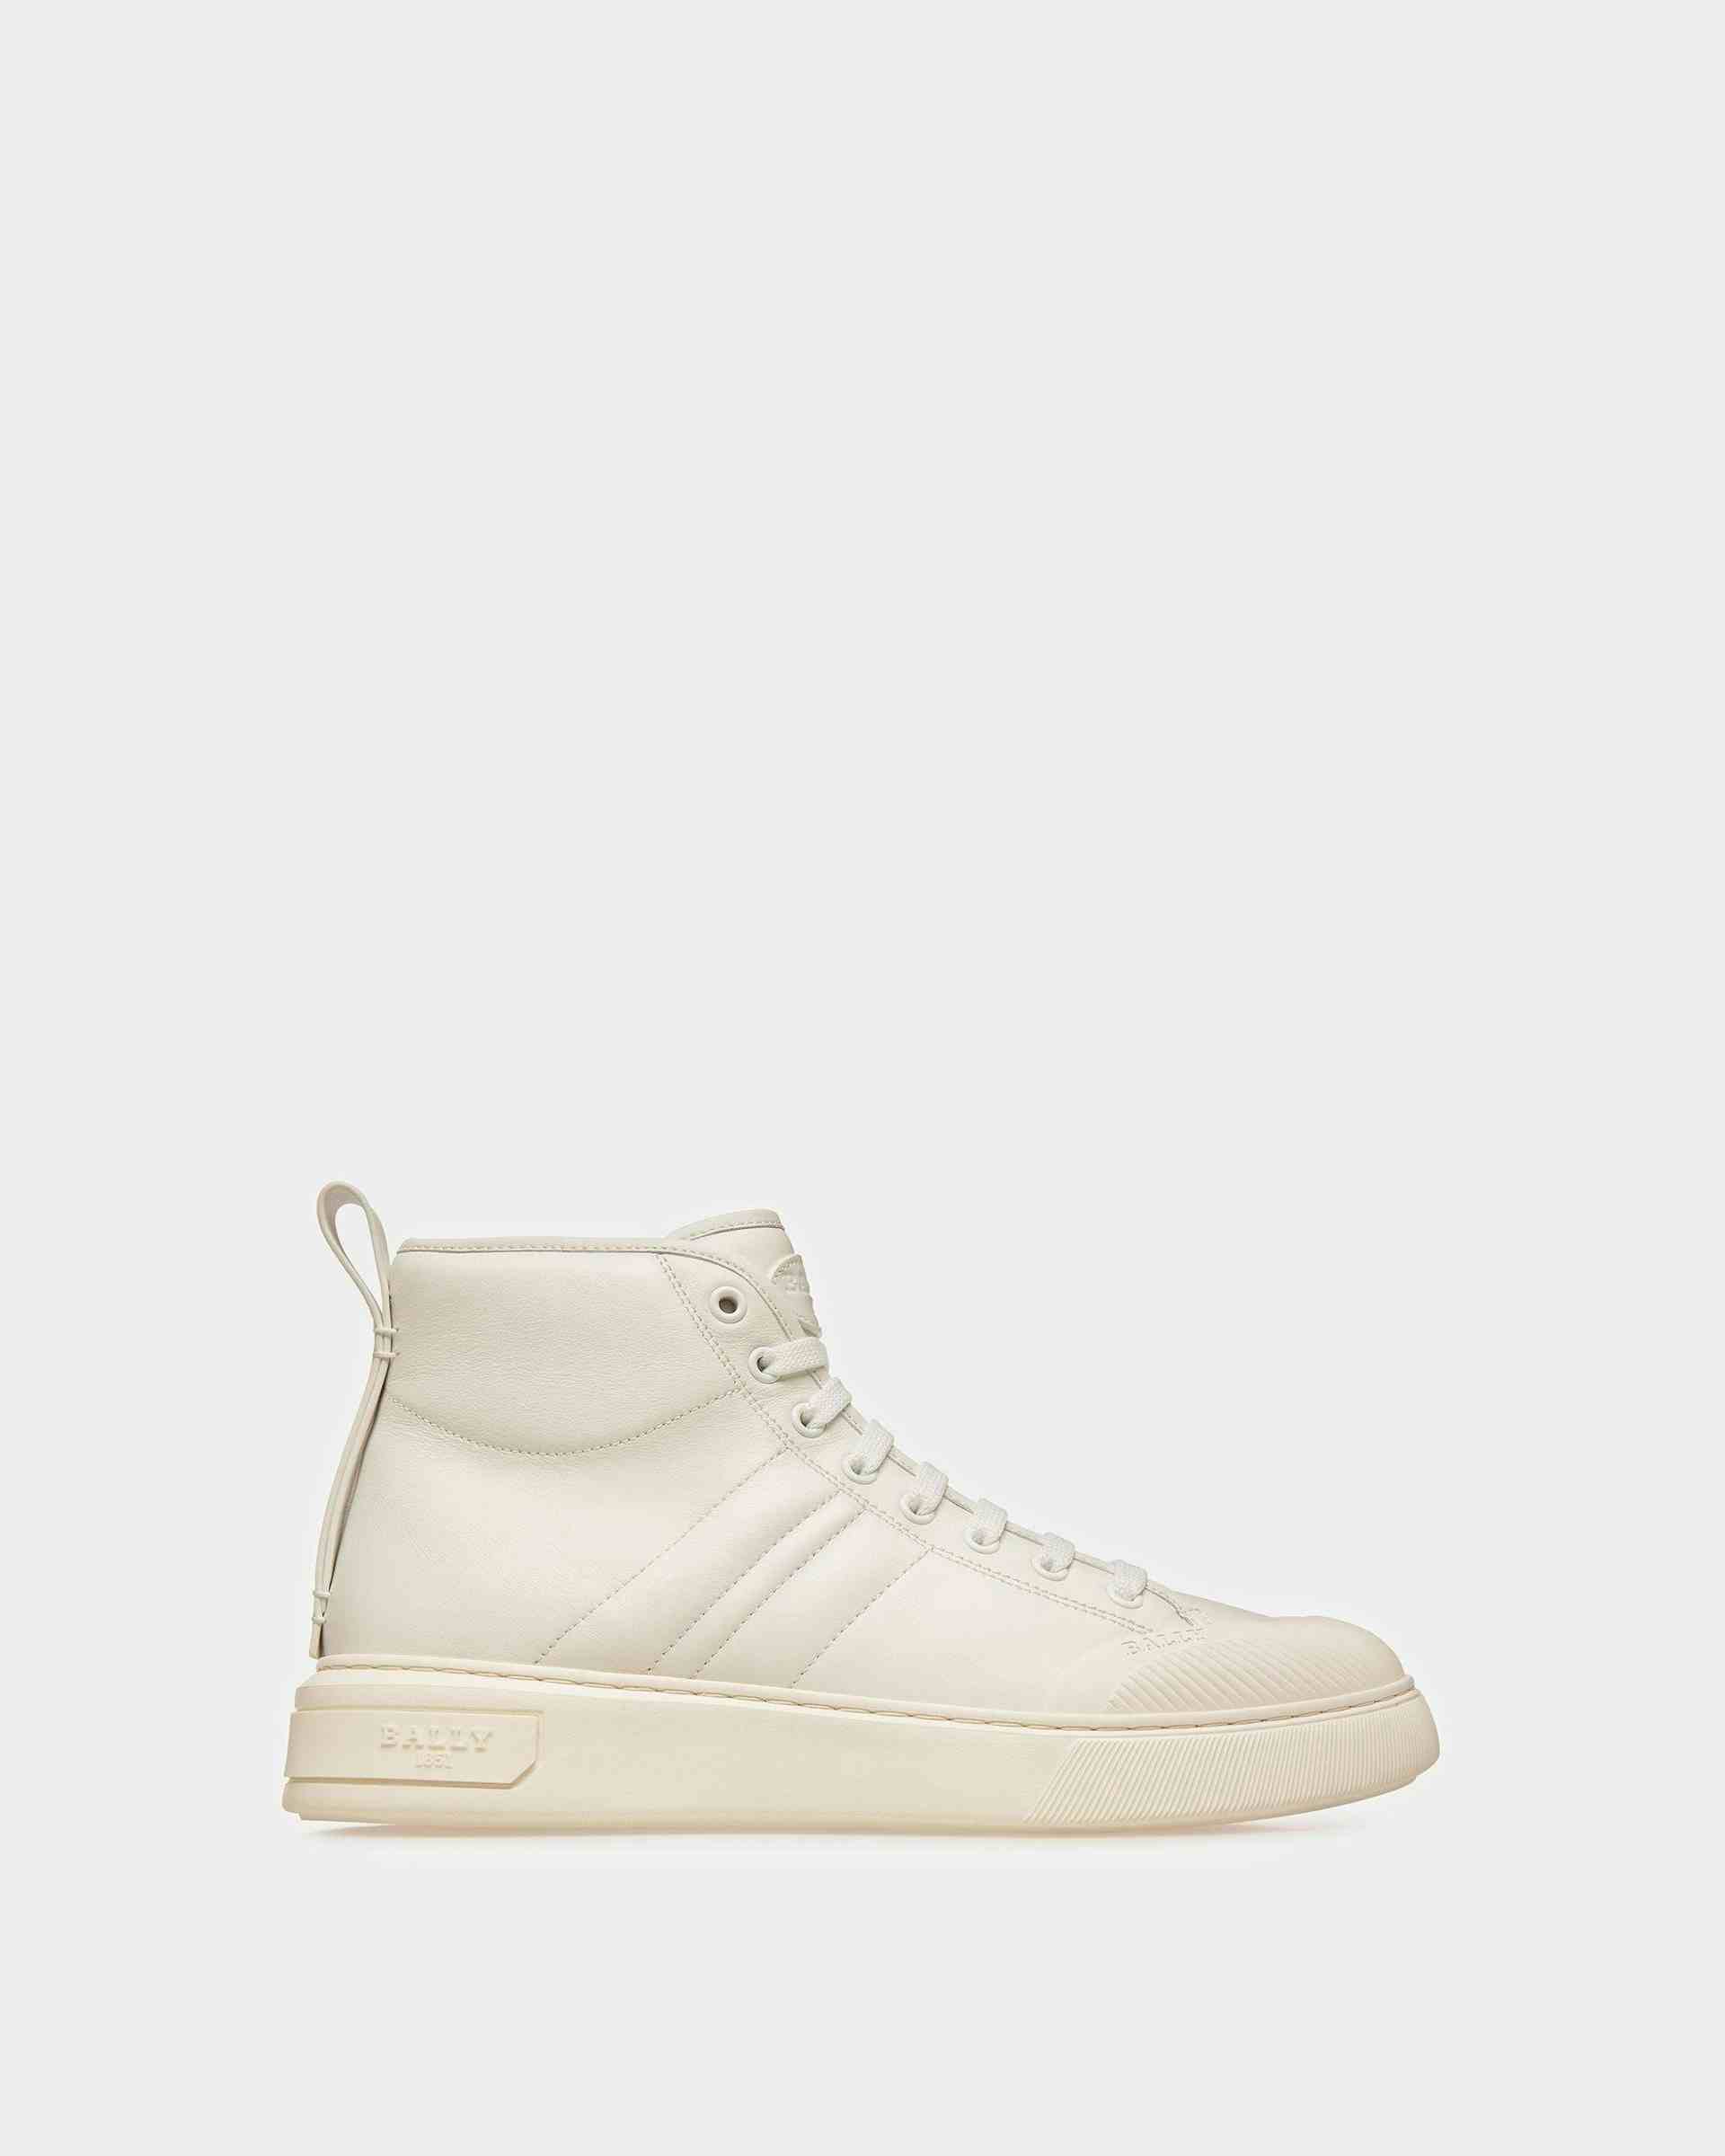 Maren Leather Sneakers In White - Men's - Bally